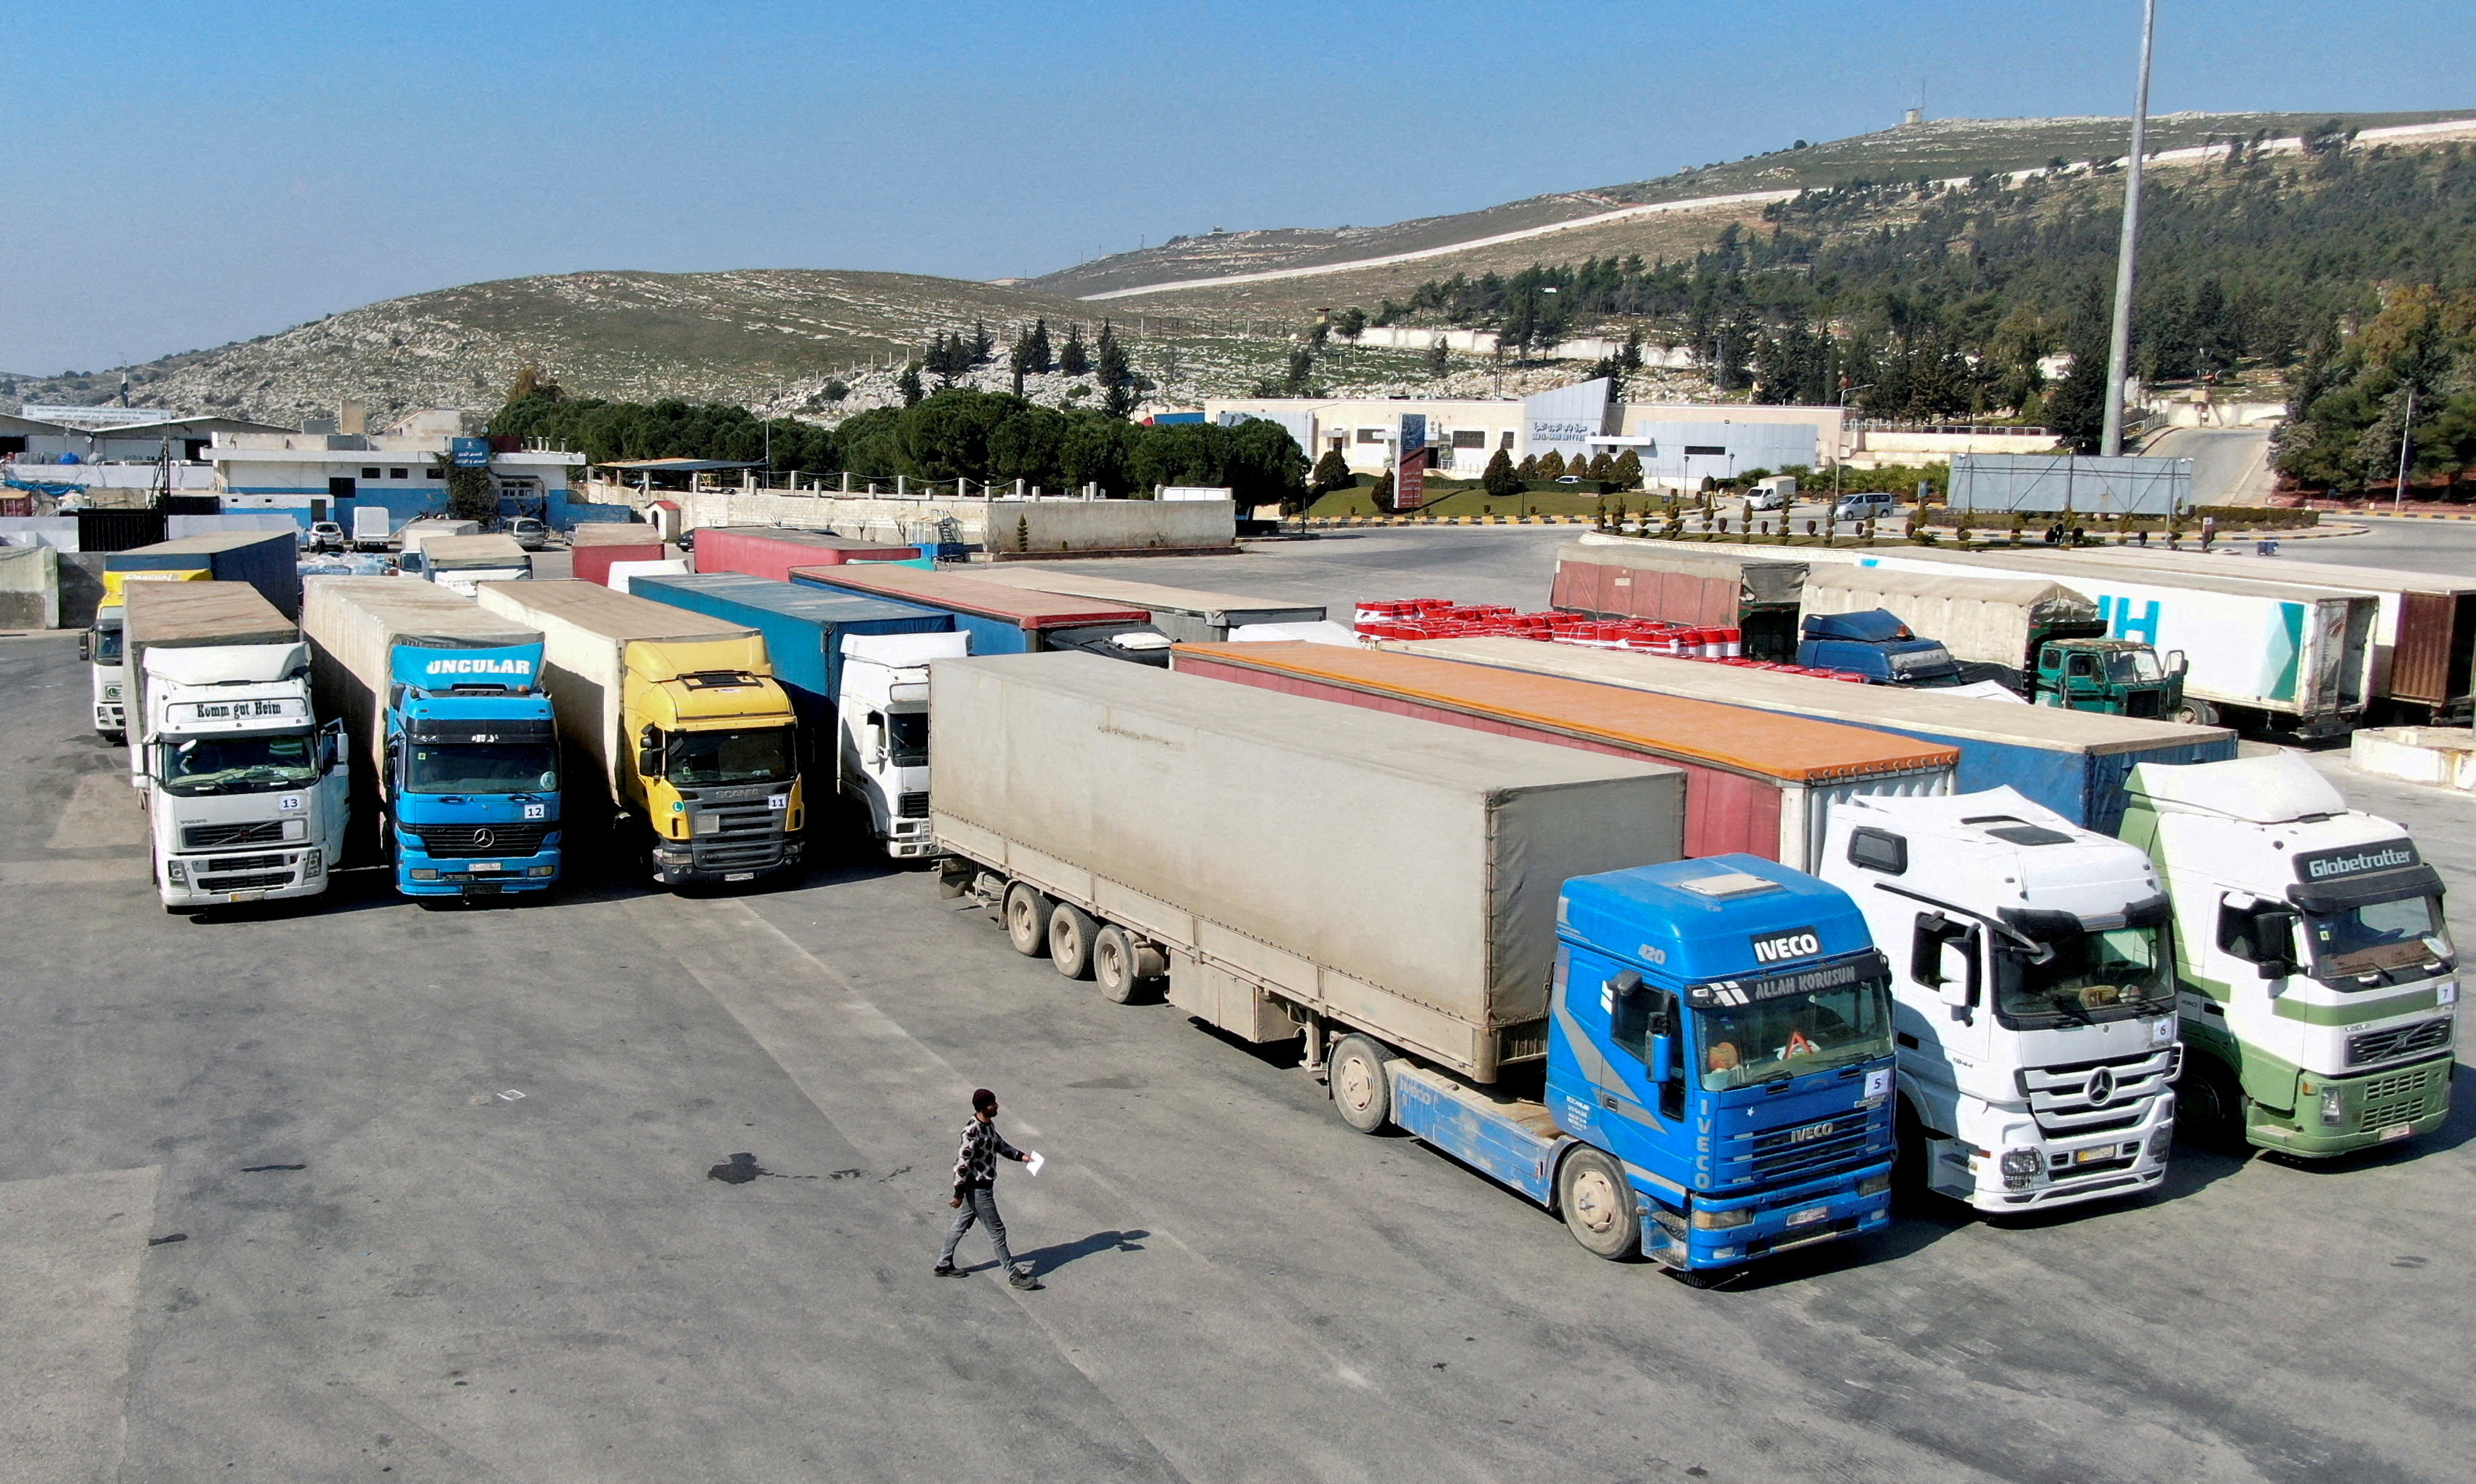 Trucks carrying aid from the UN World Food Programme (WFP) are parked at Bab al-Hawa crossing